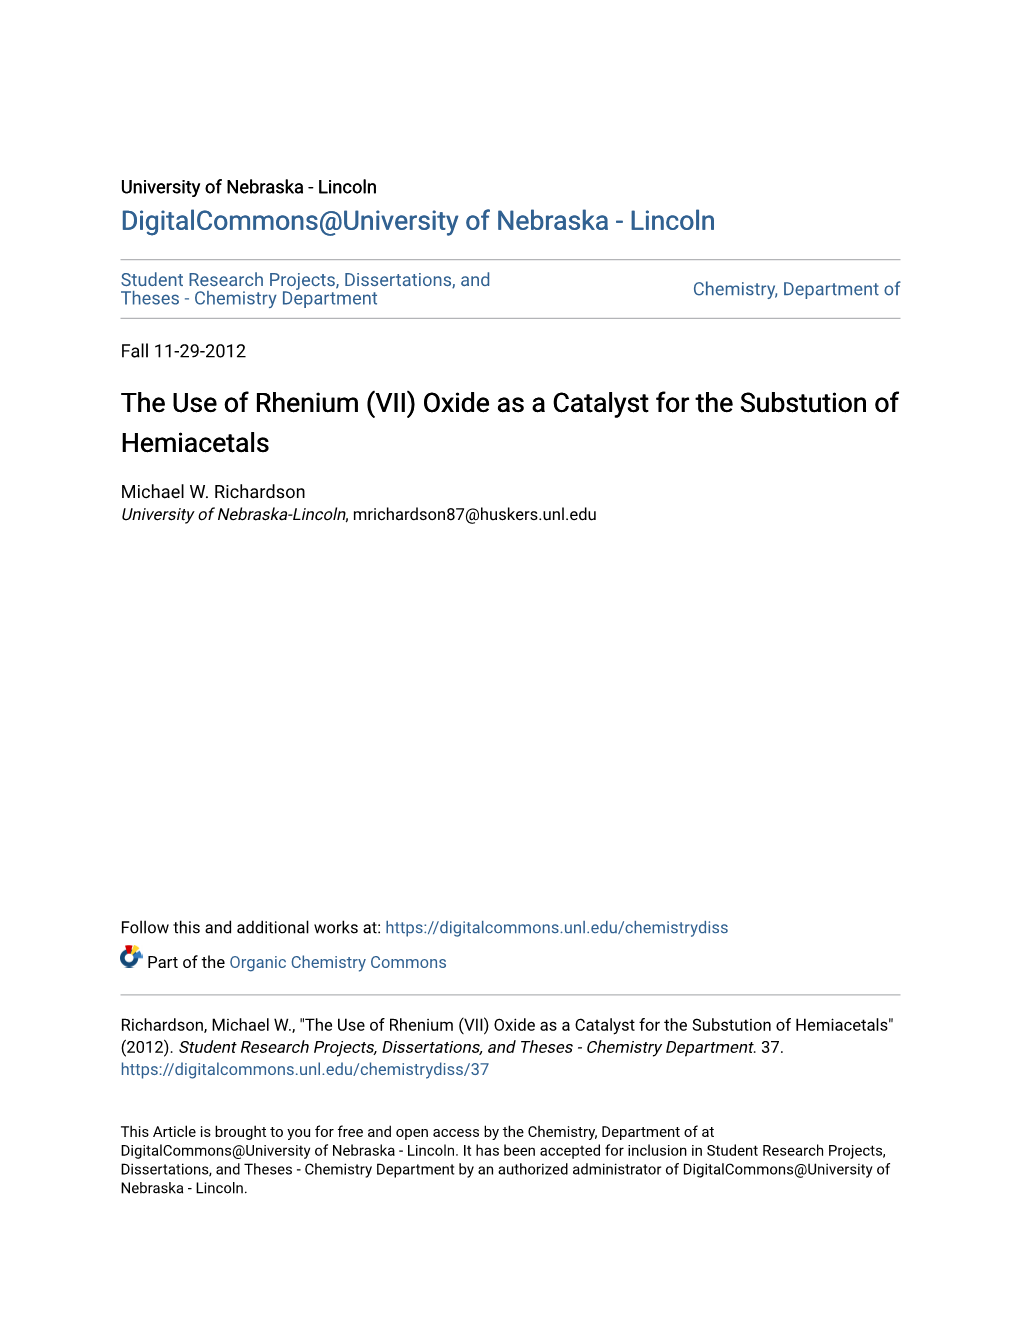 (VII) Oxide As a Catalyst for the Substution of Hemiacetals